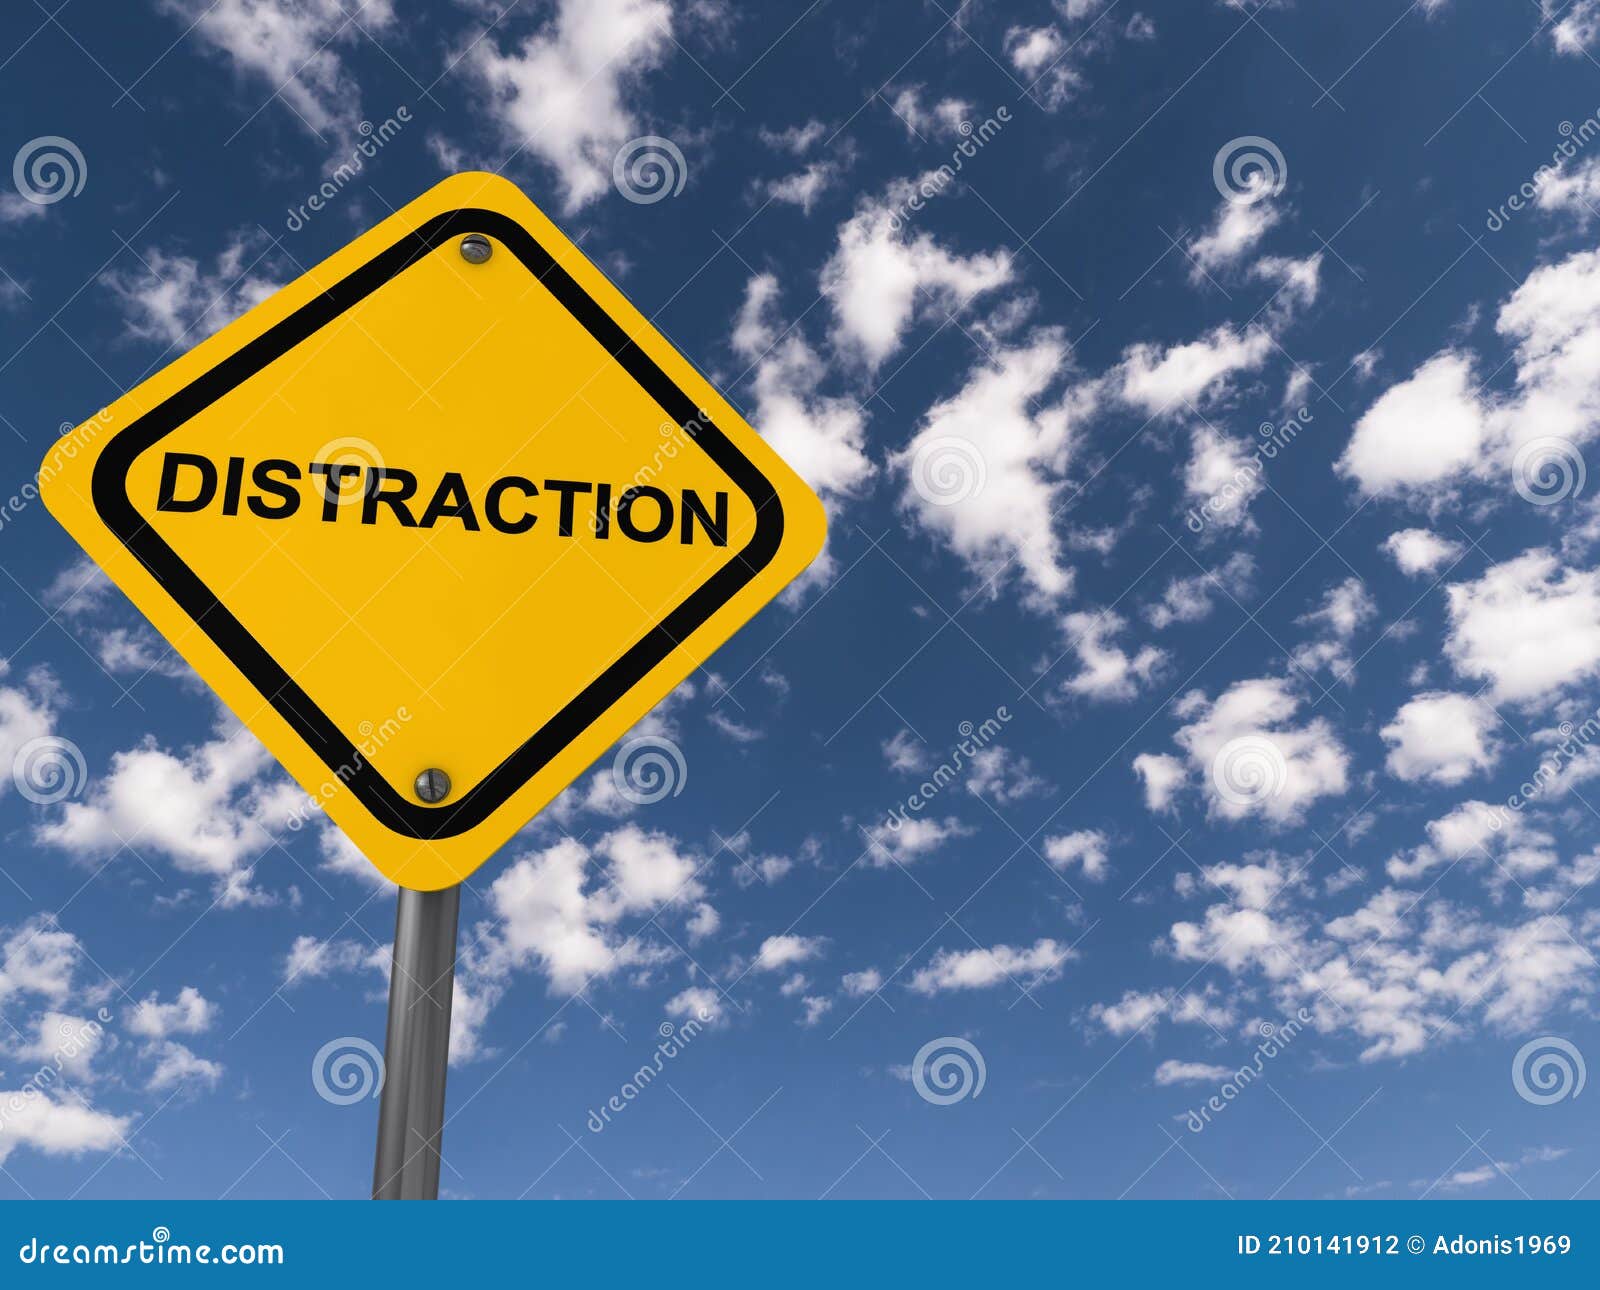 distraction traffic sign